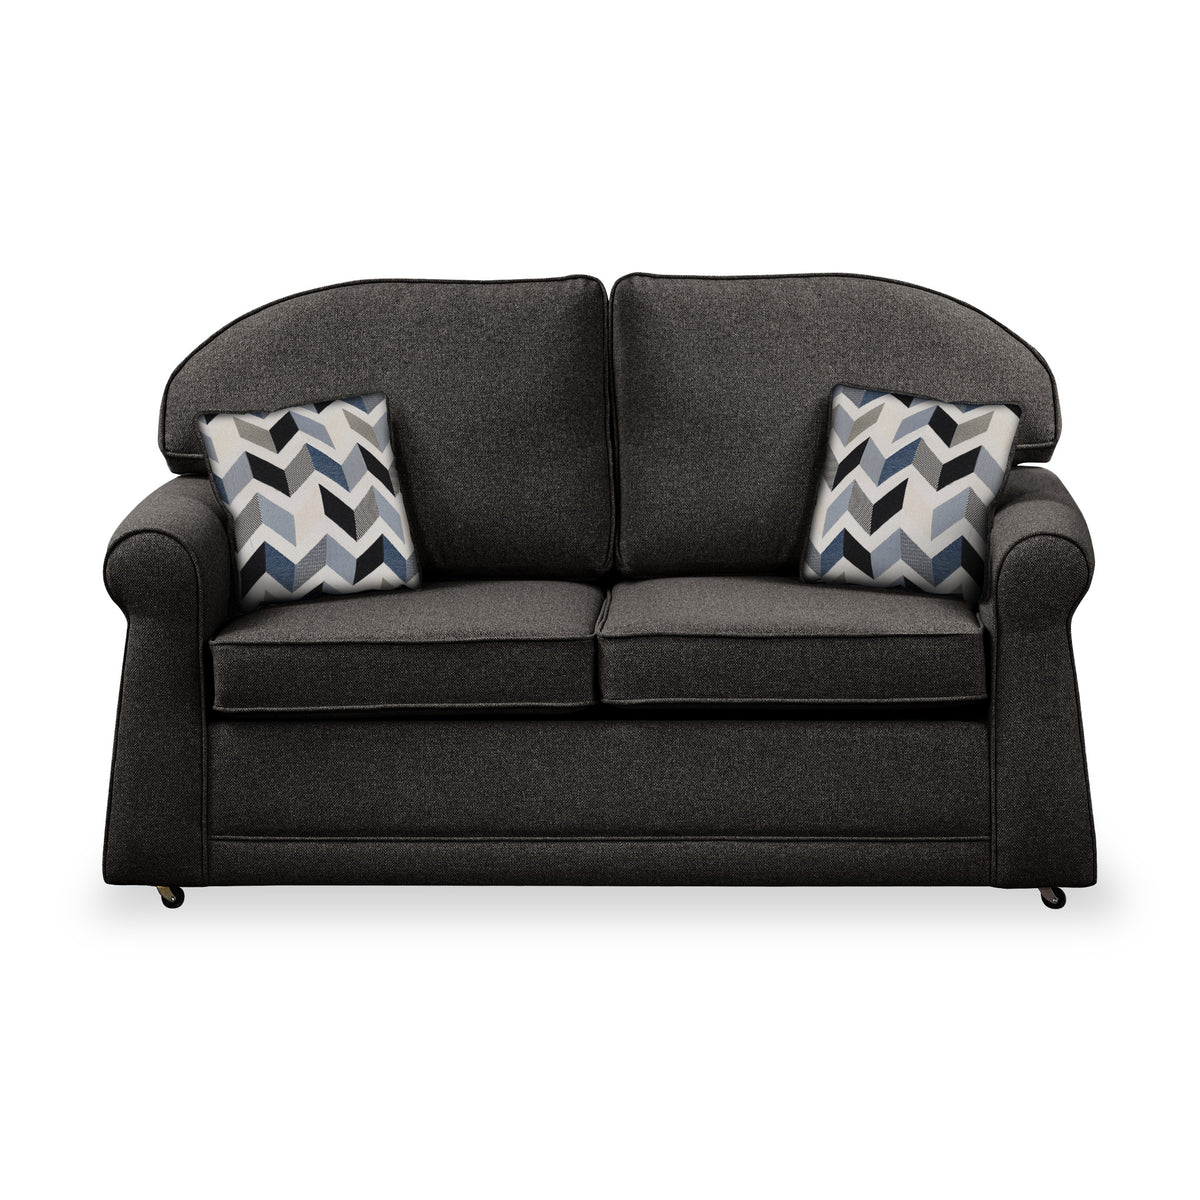 Croxdon Charcoal Faux Linen 2 Seater Sofabed with Denim Scatter Cushions from Roseland Furniture